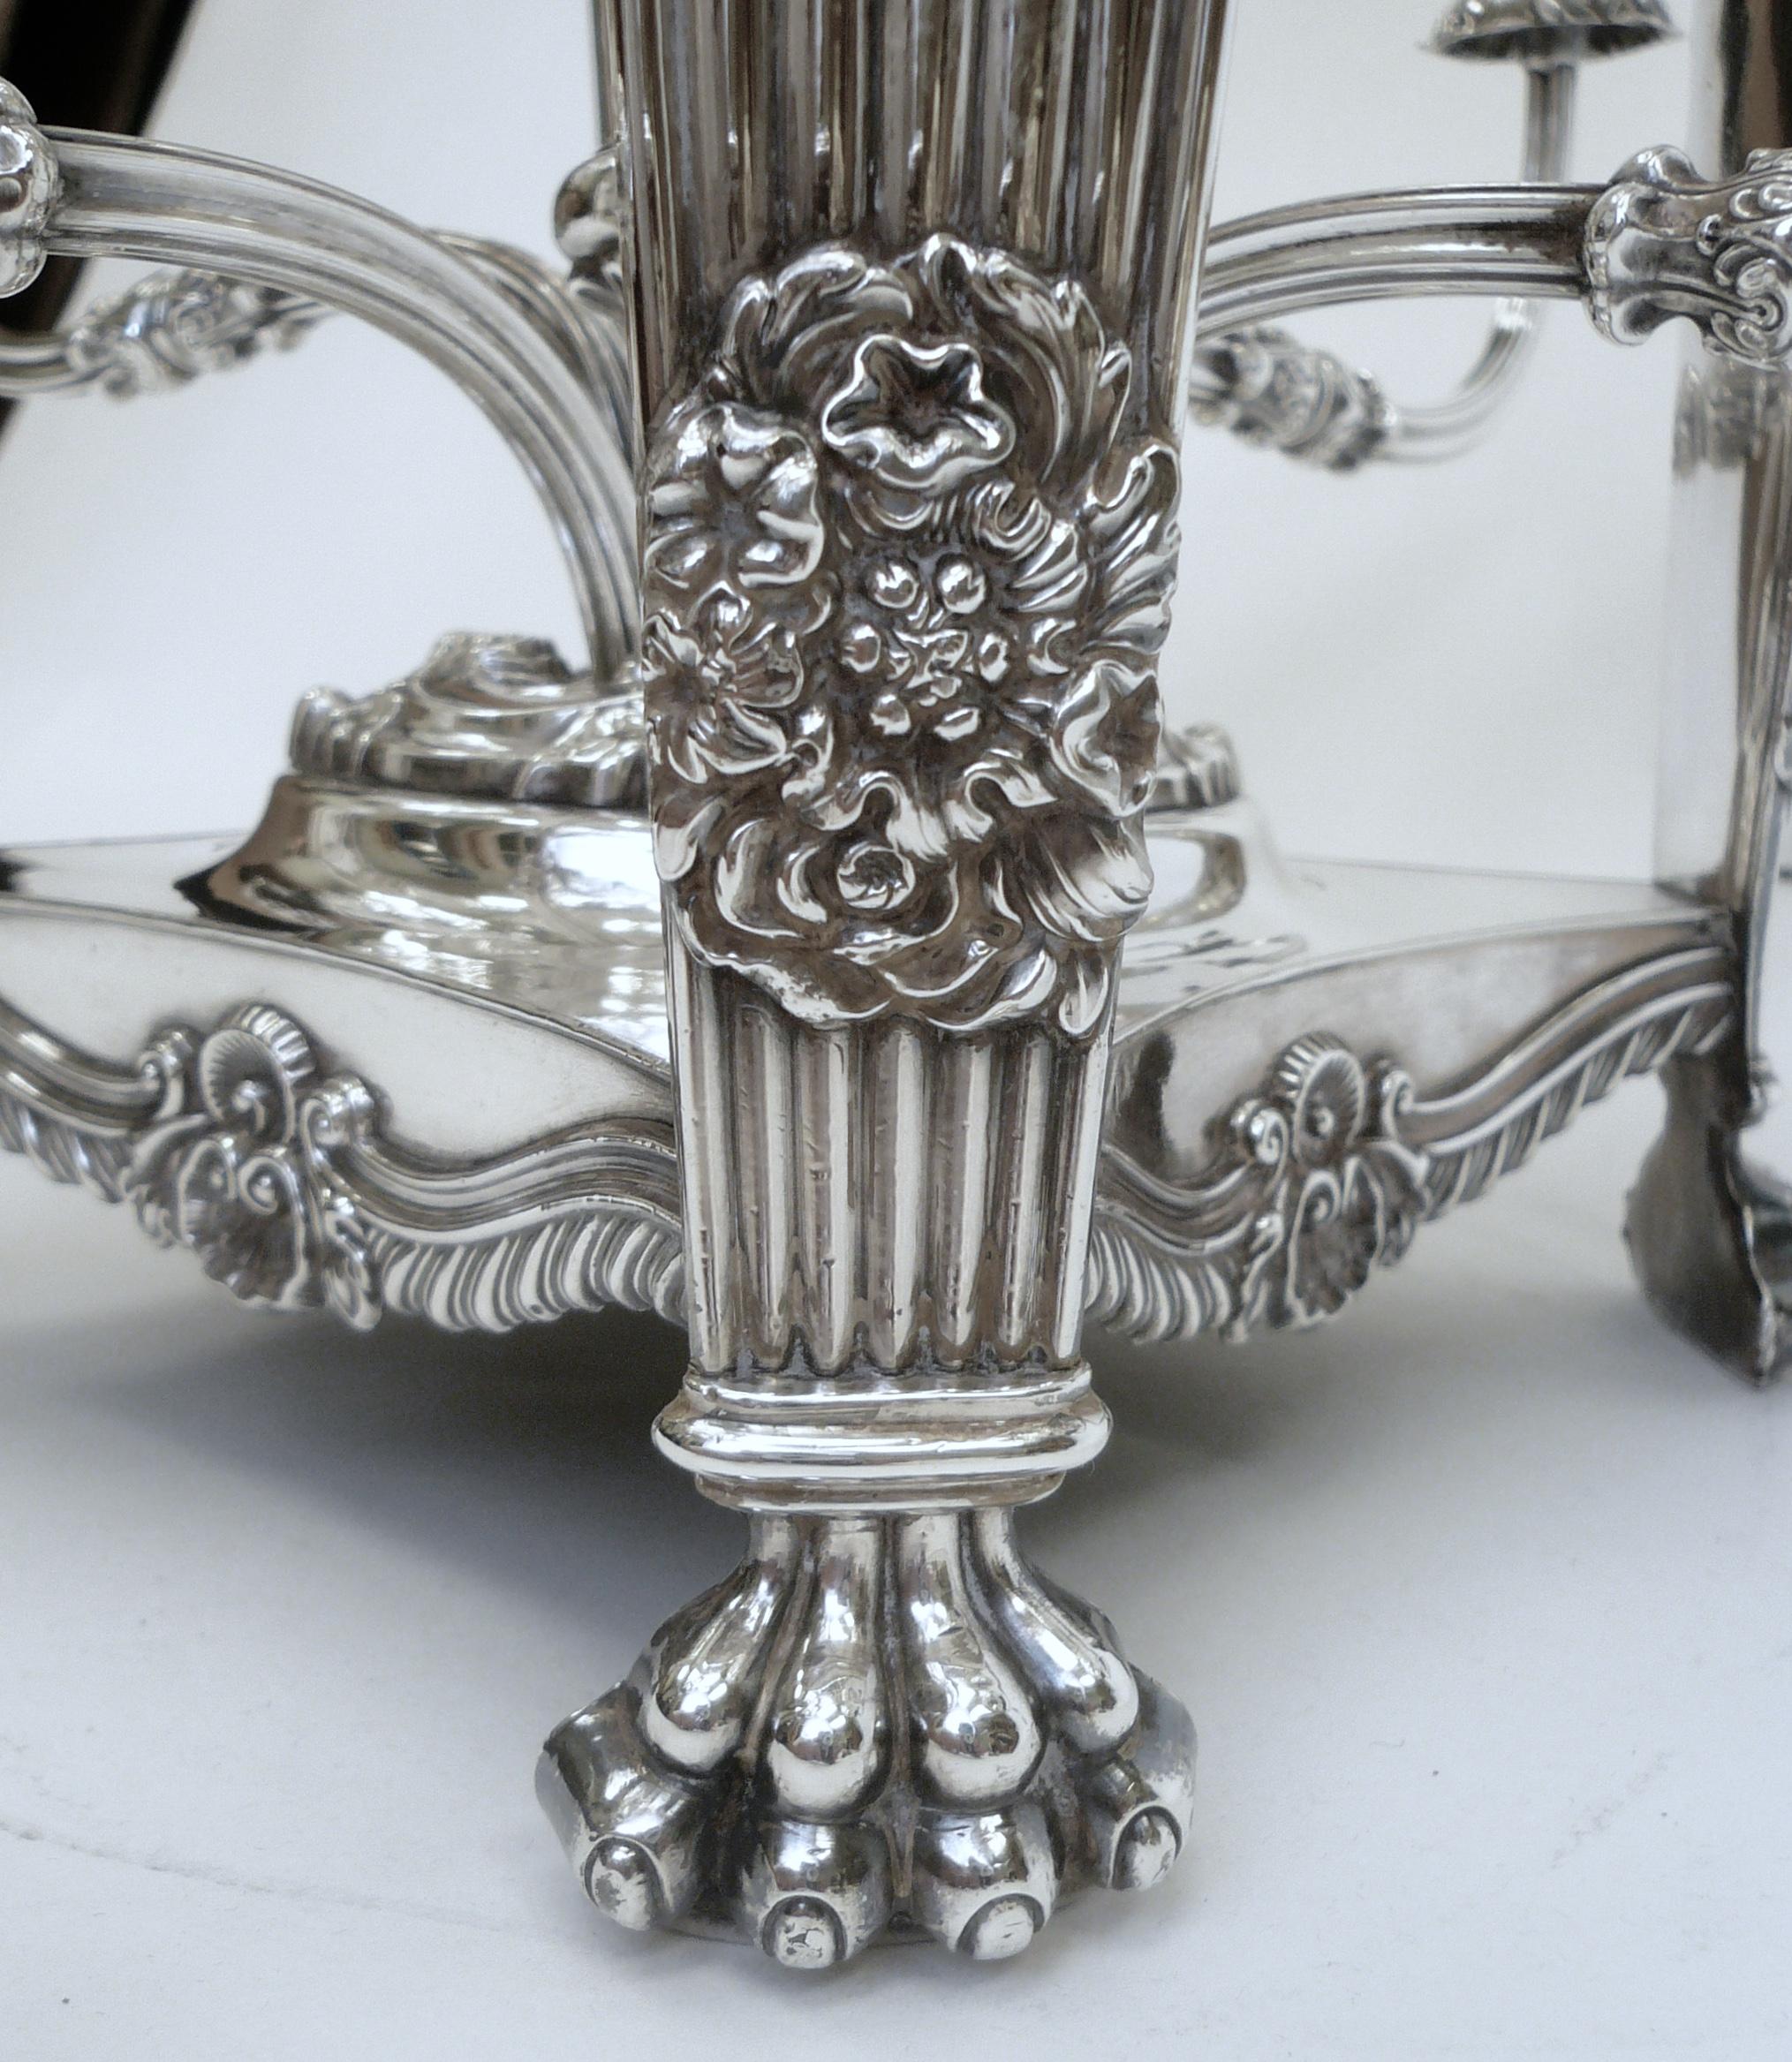 Faceted English Regency Silver & Cut Crystal Epergne or Centerpiece